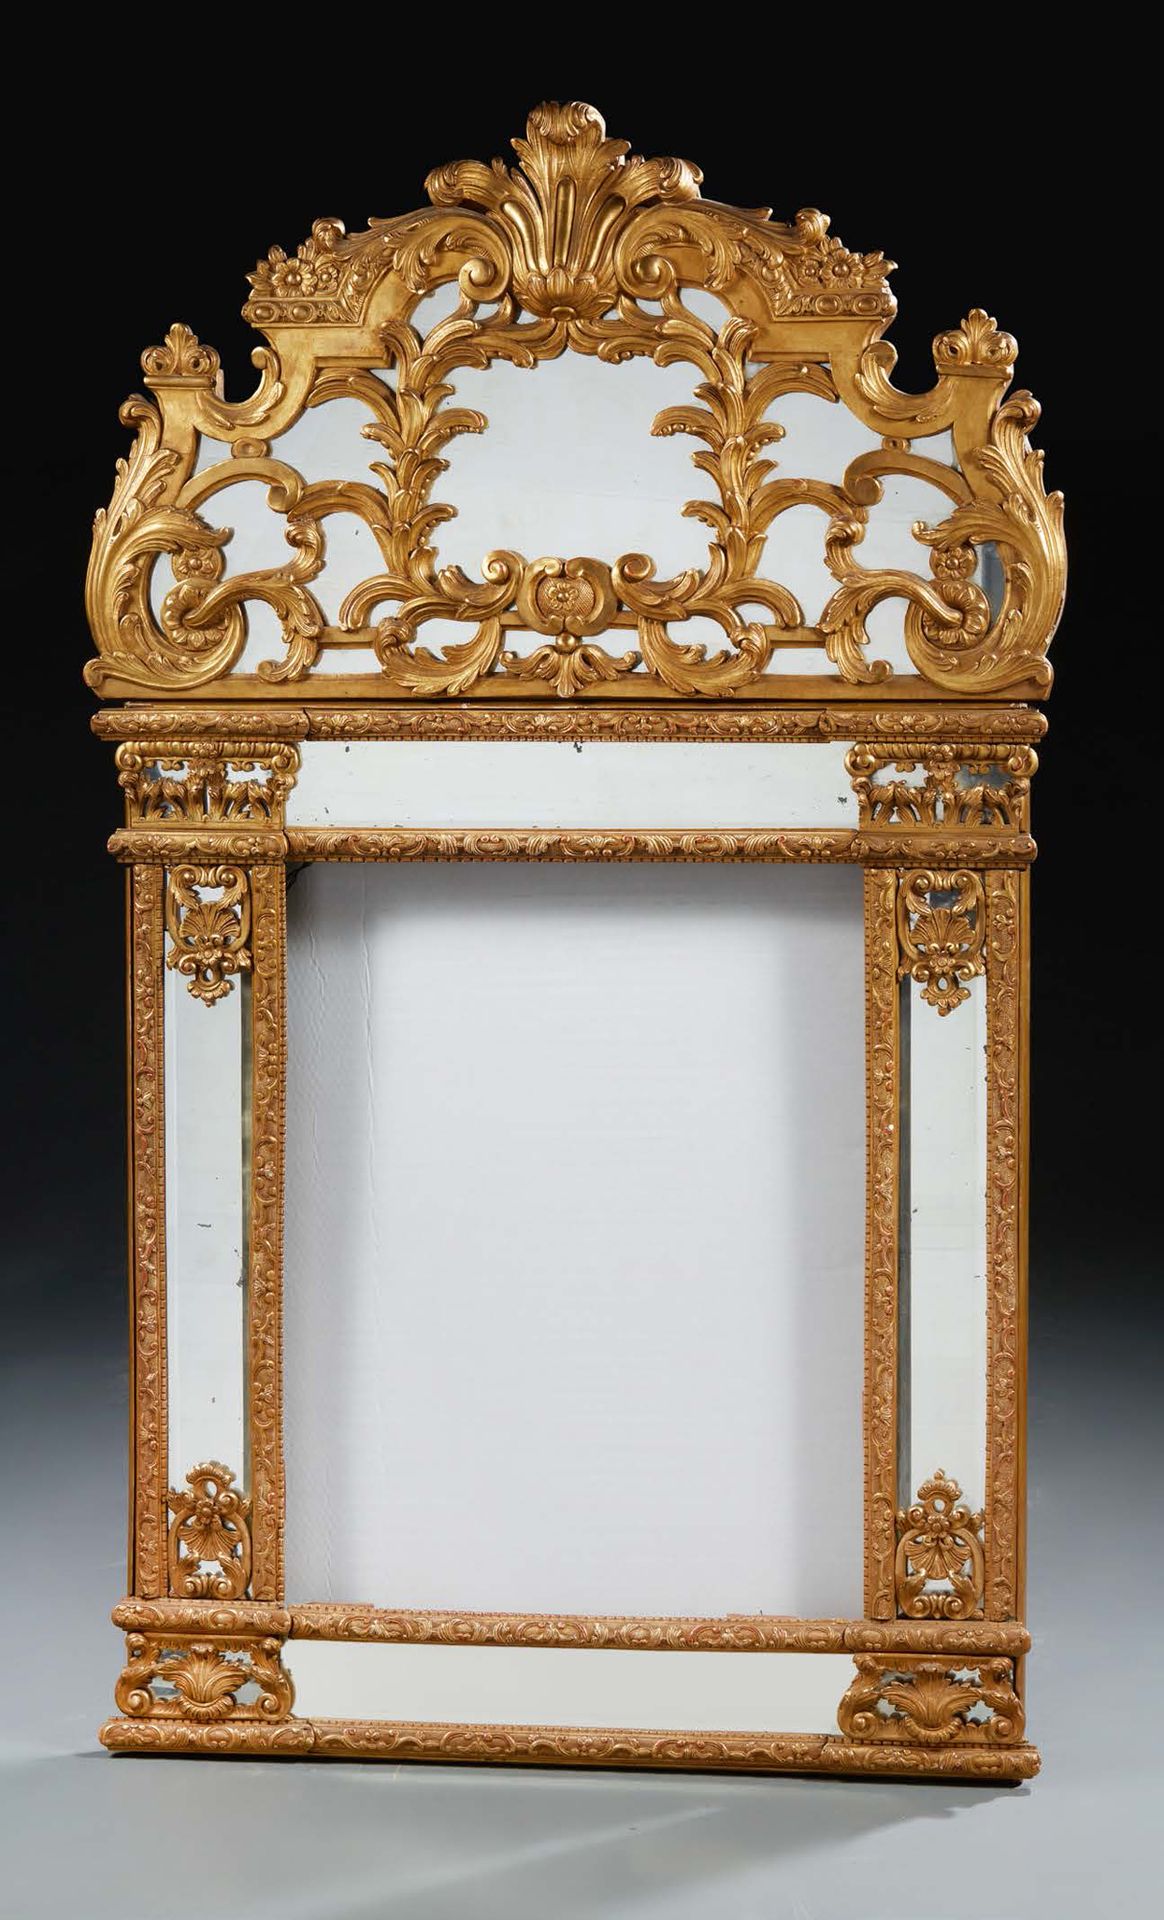 Null Wooden and gilded stucco mirror.
Missing the central mirror.
Late 19th cent&hellip;